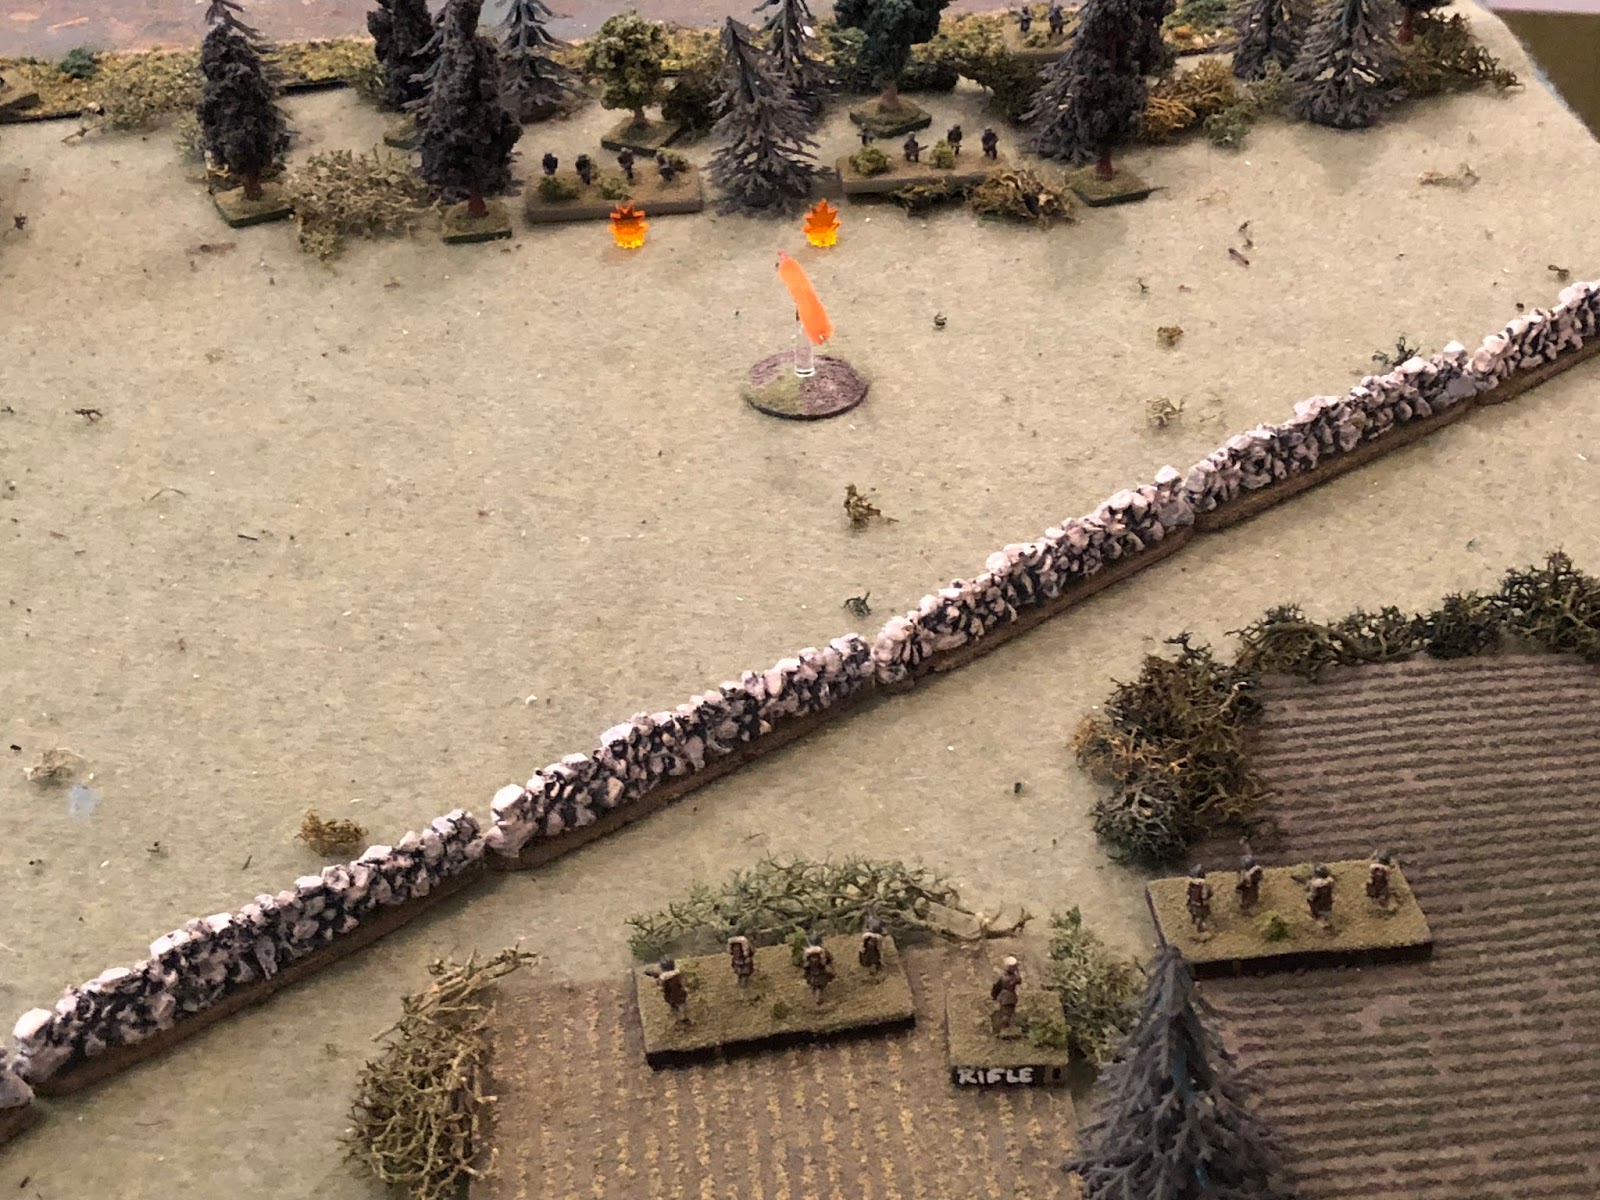  The French Lieutenant gets the remaining two squads of 1st Platoon on line (bottom, still haven't reached the wall!), where they open fire on the Motorcycle Platoon. 